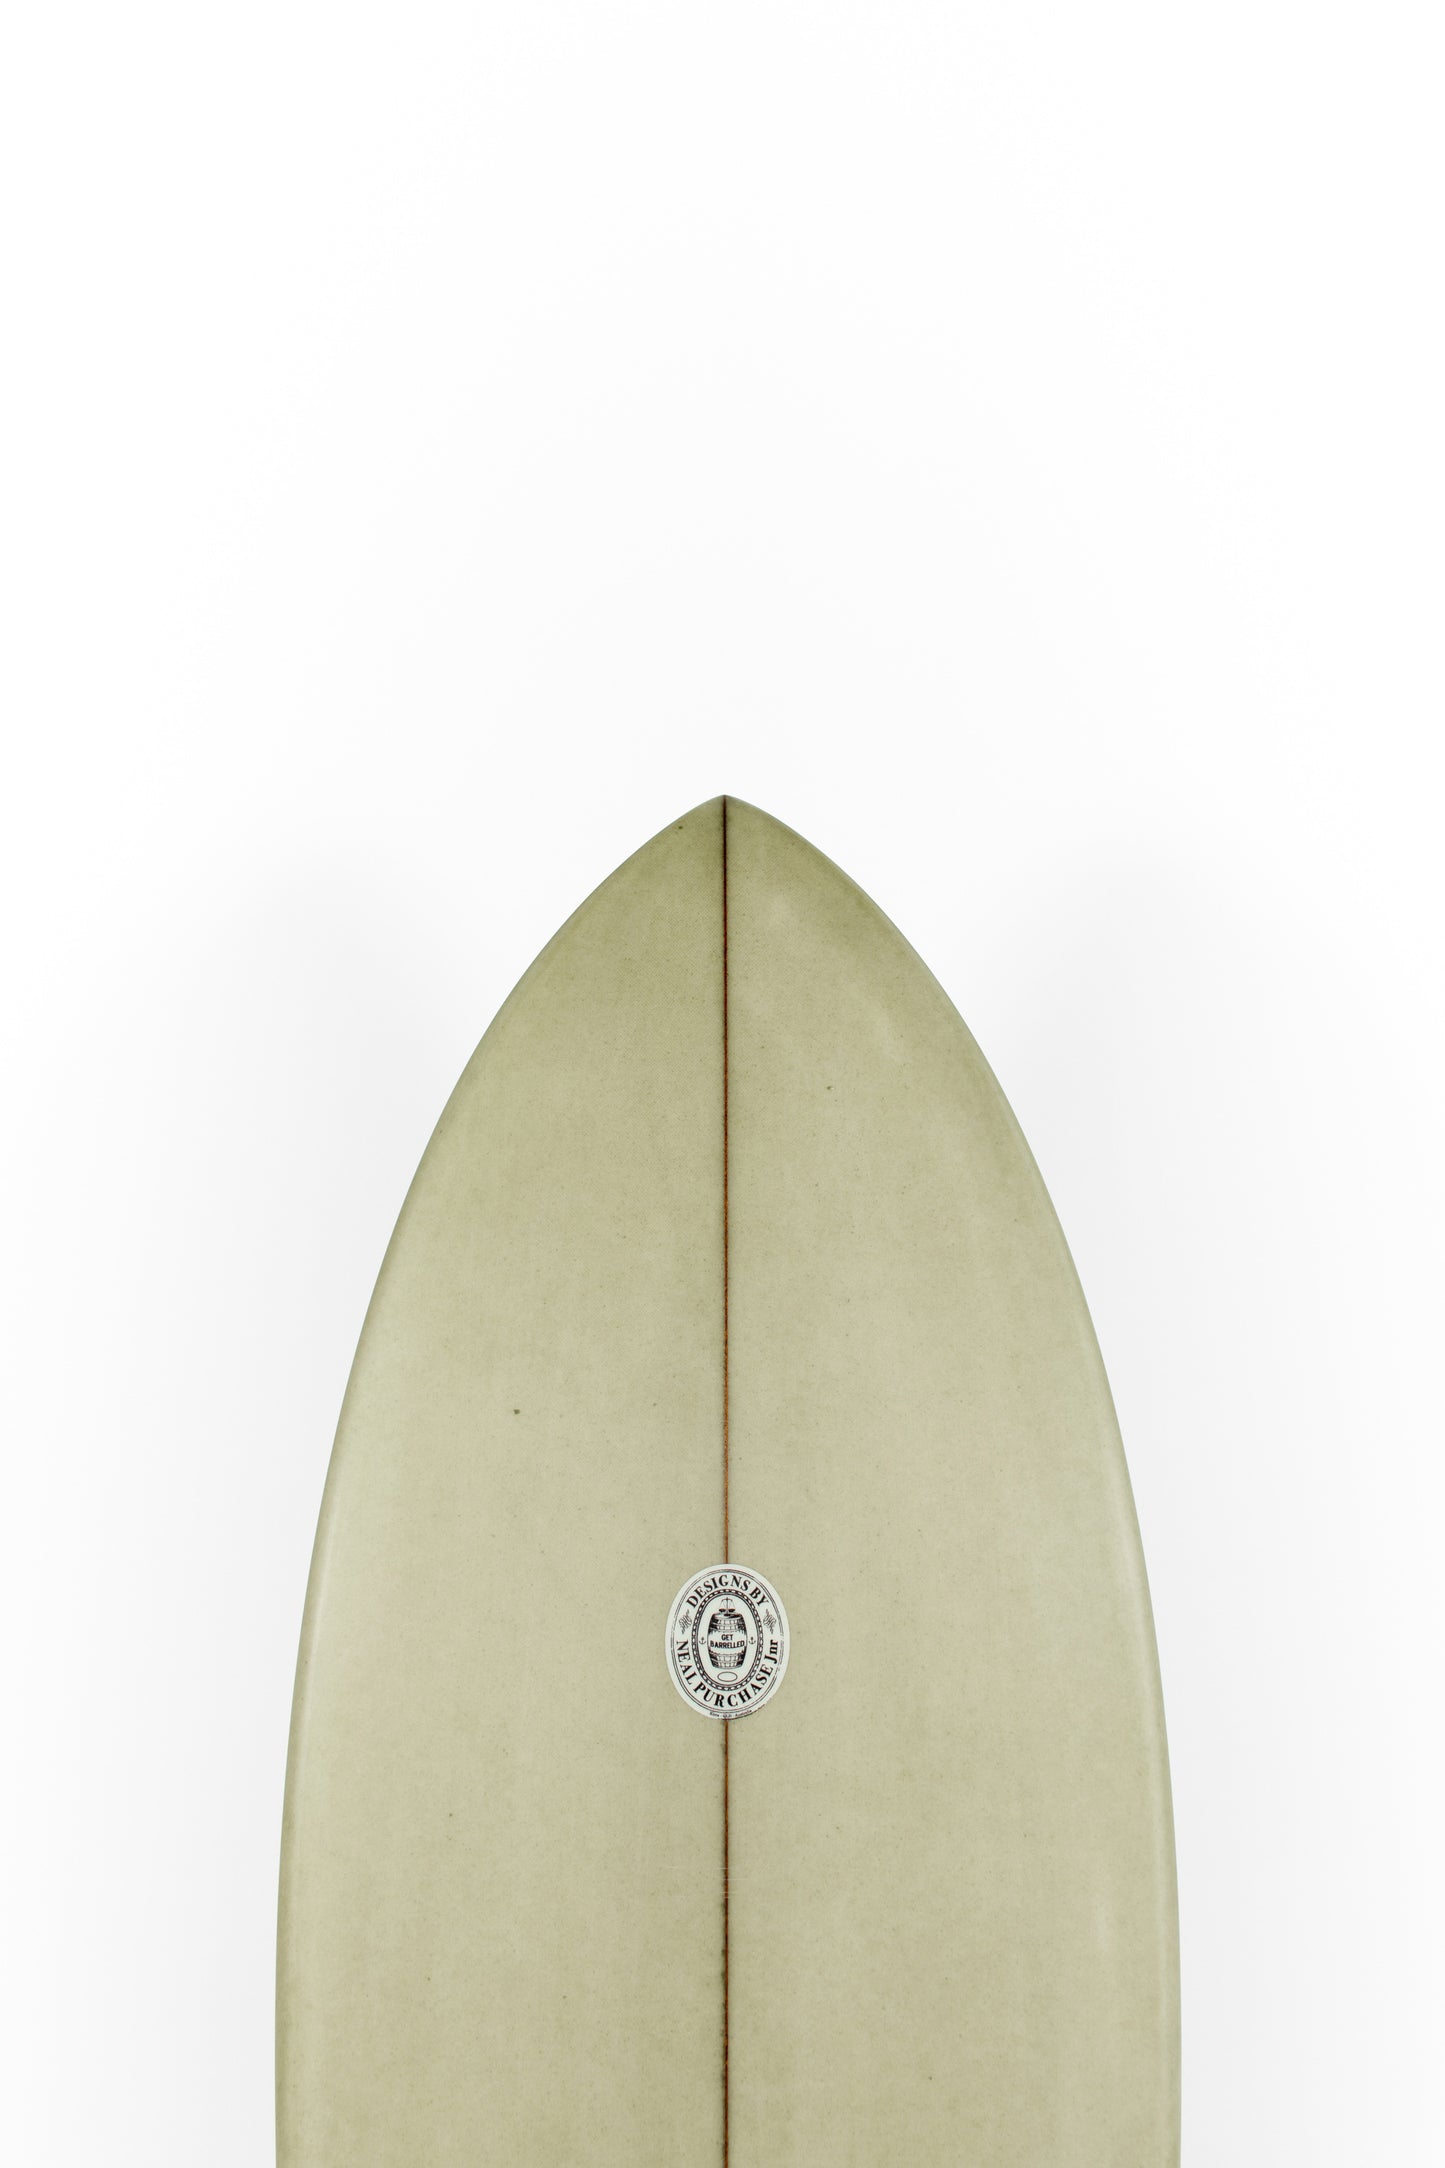 Neal Purchase Jnr Surfboards - STING FISH DUO - 5'4